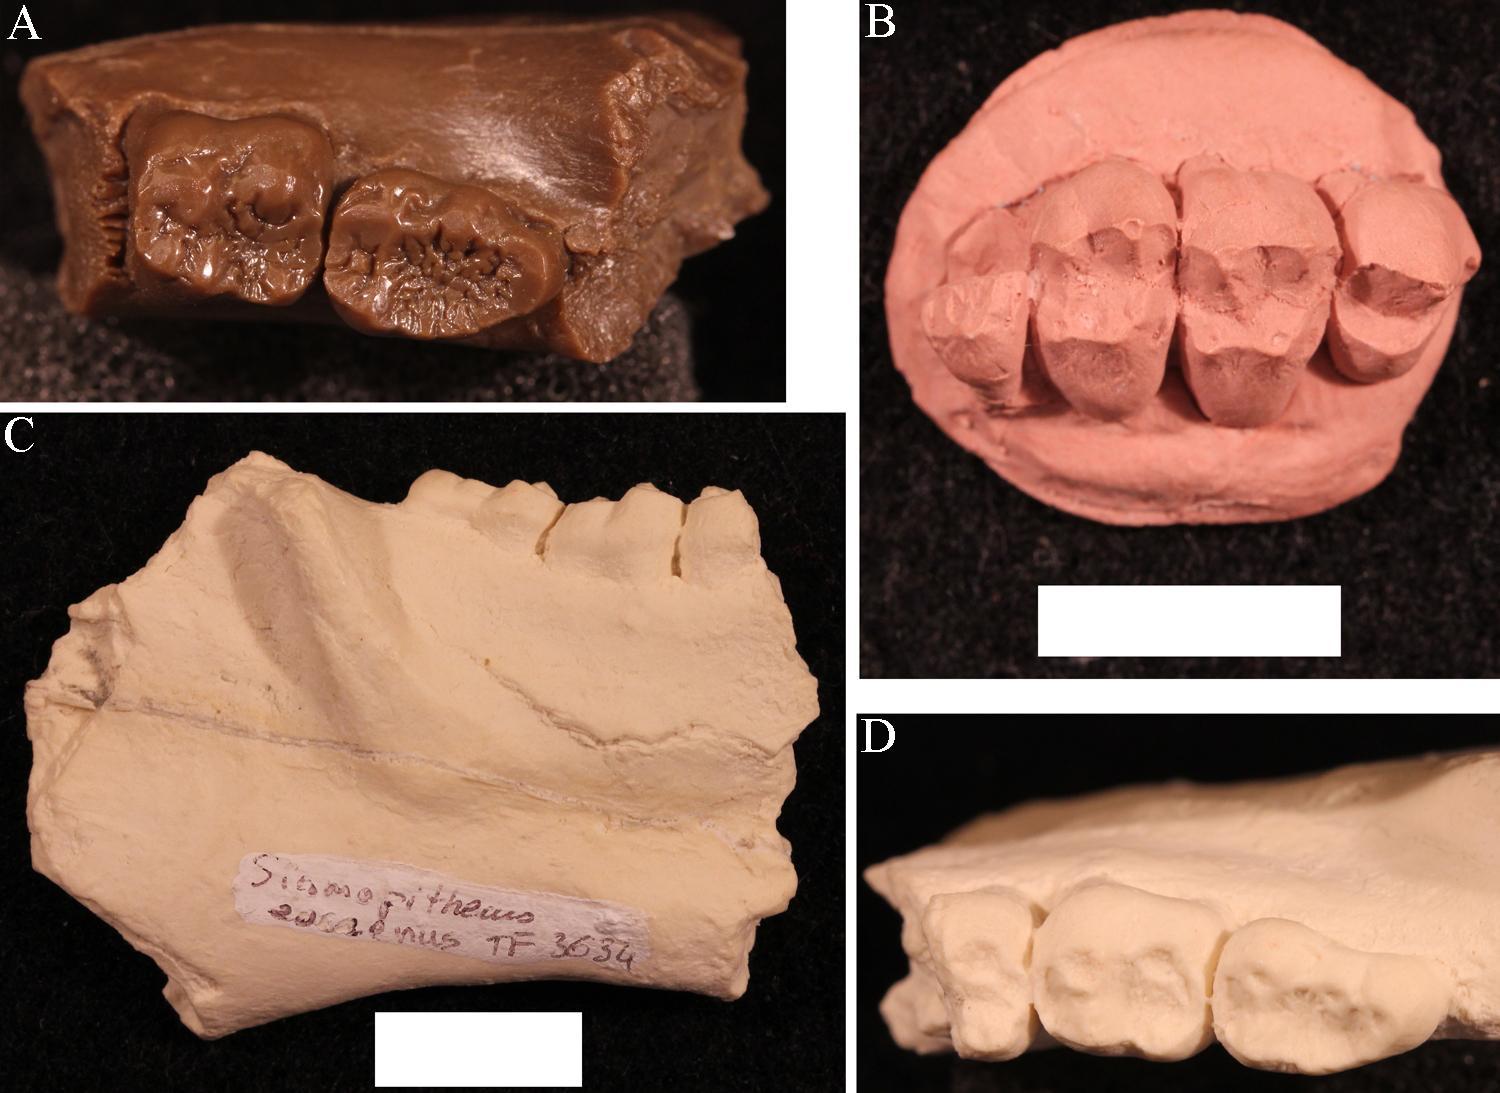 Four casts of jawbone fragments with teeth.